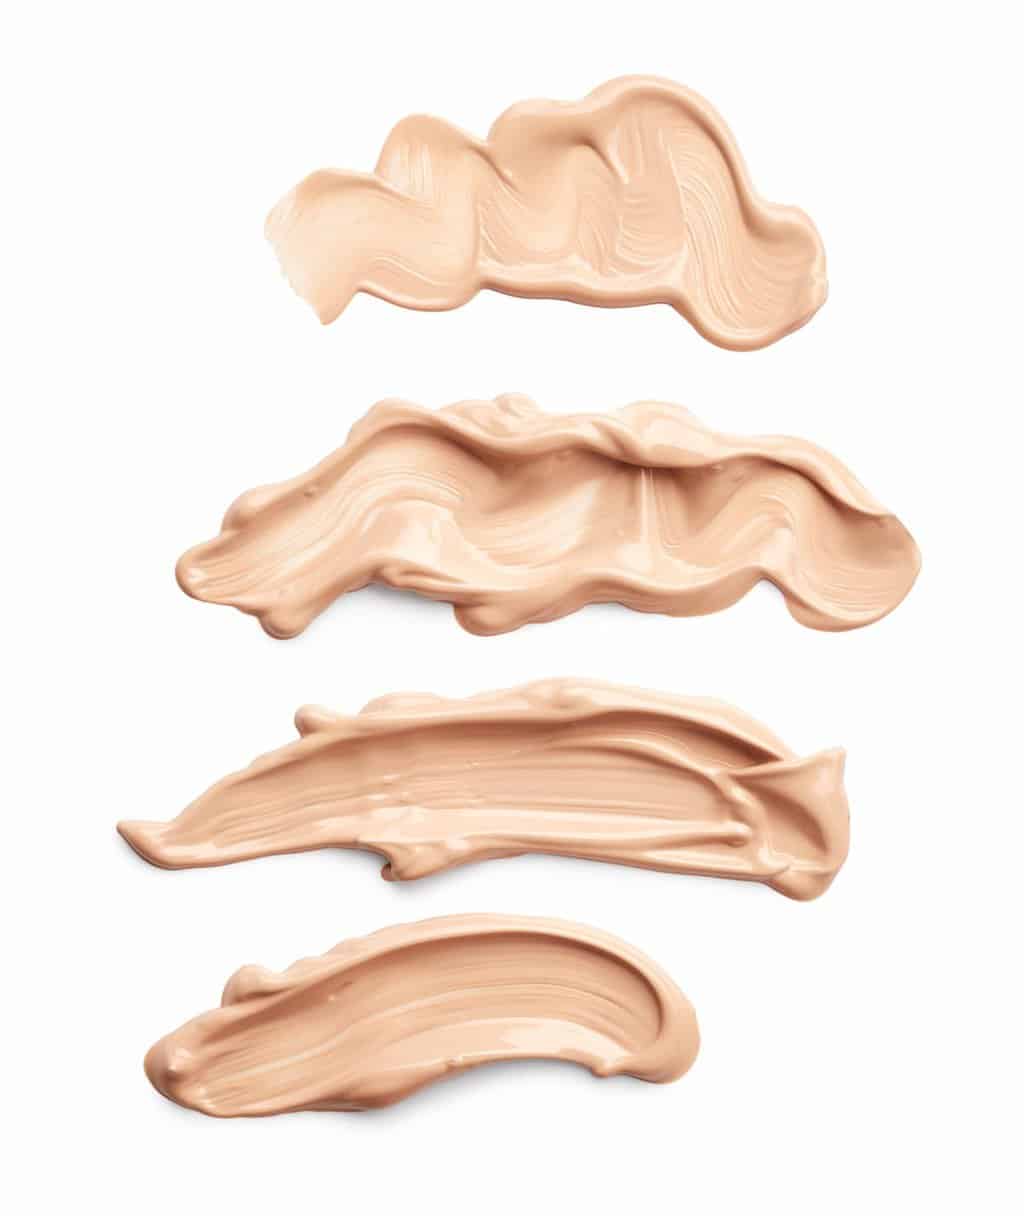 swatches of fair toned foundation on a whitebackground